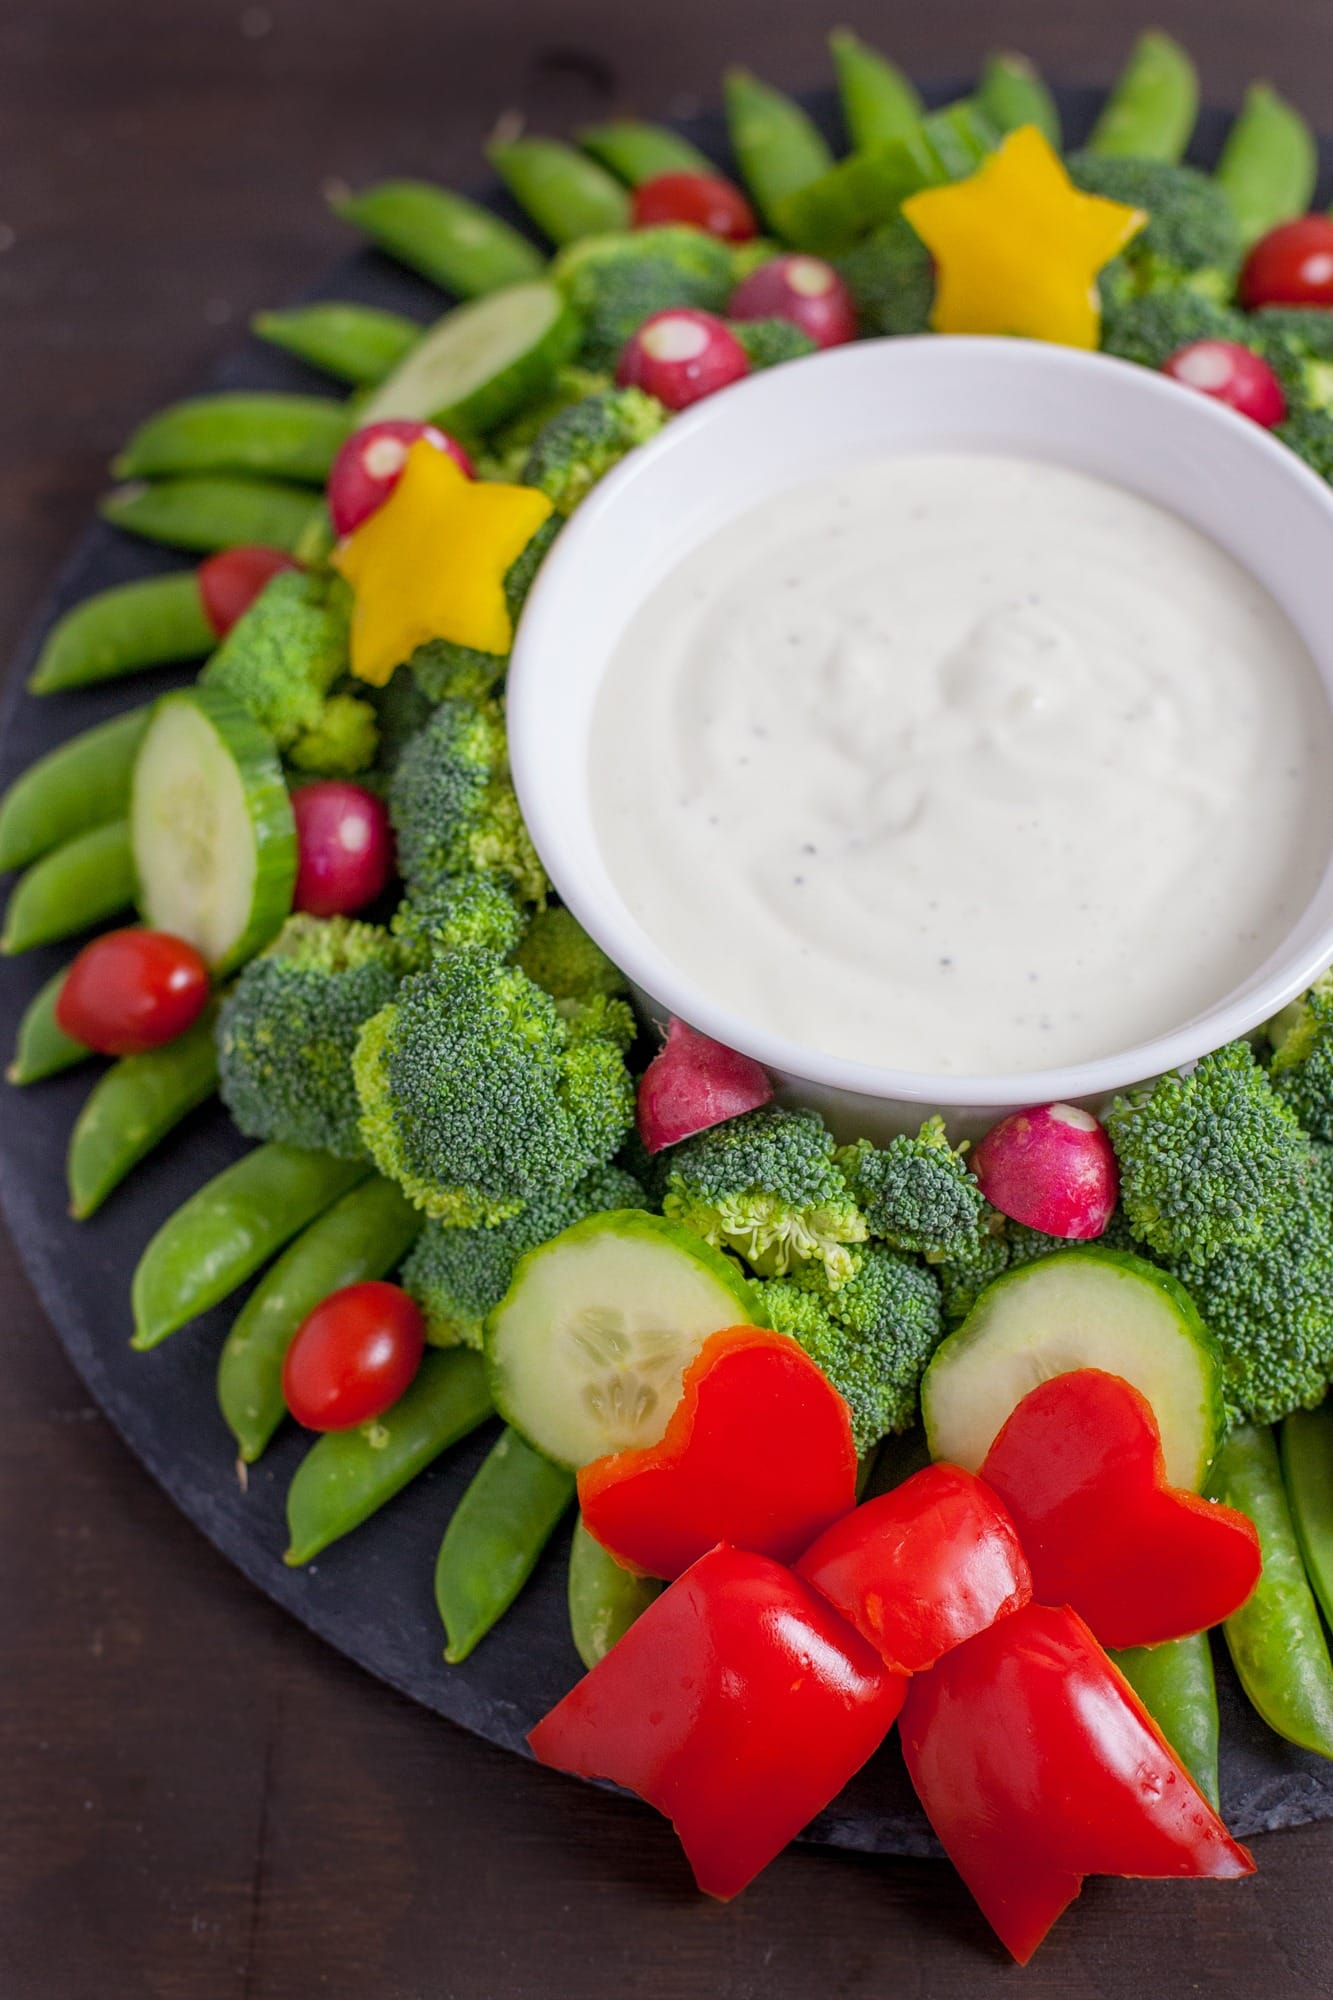 Sliced green veggies arranged with Christmas wreath inspiration served with dipping sauce. 